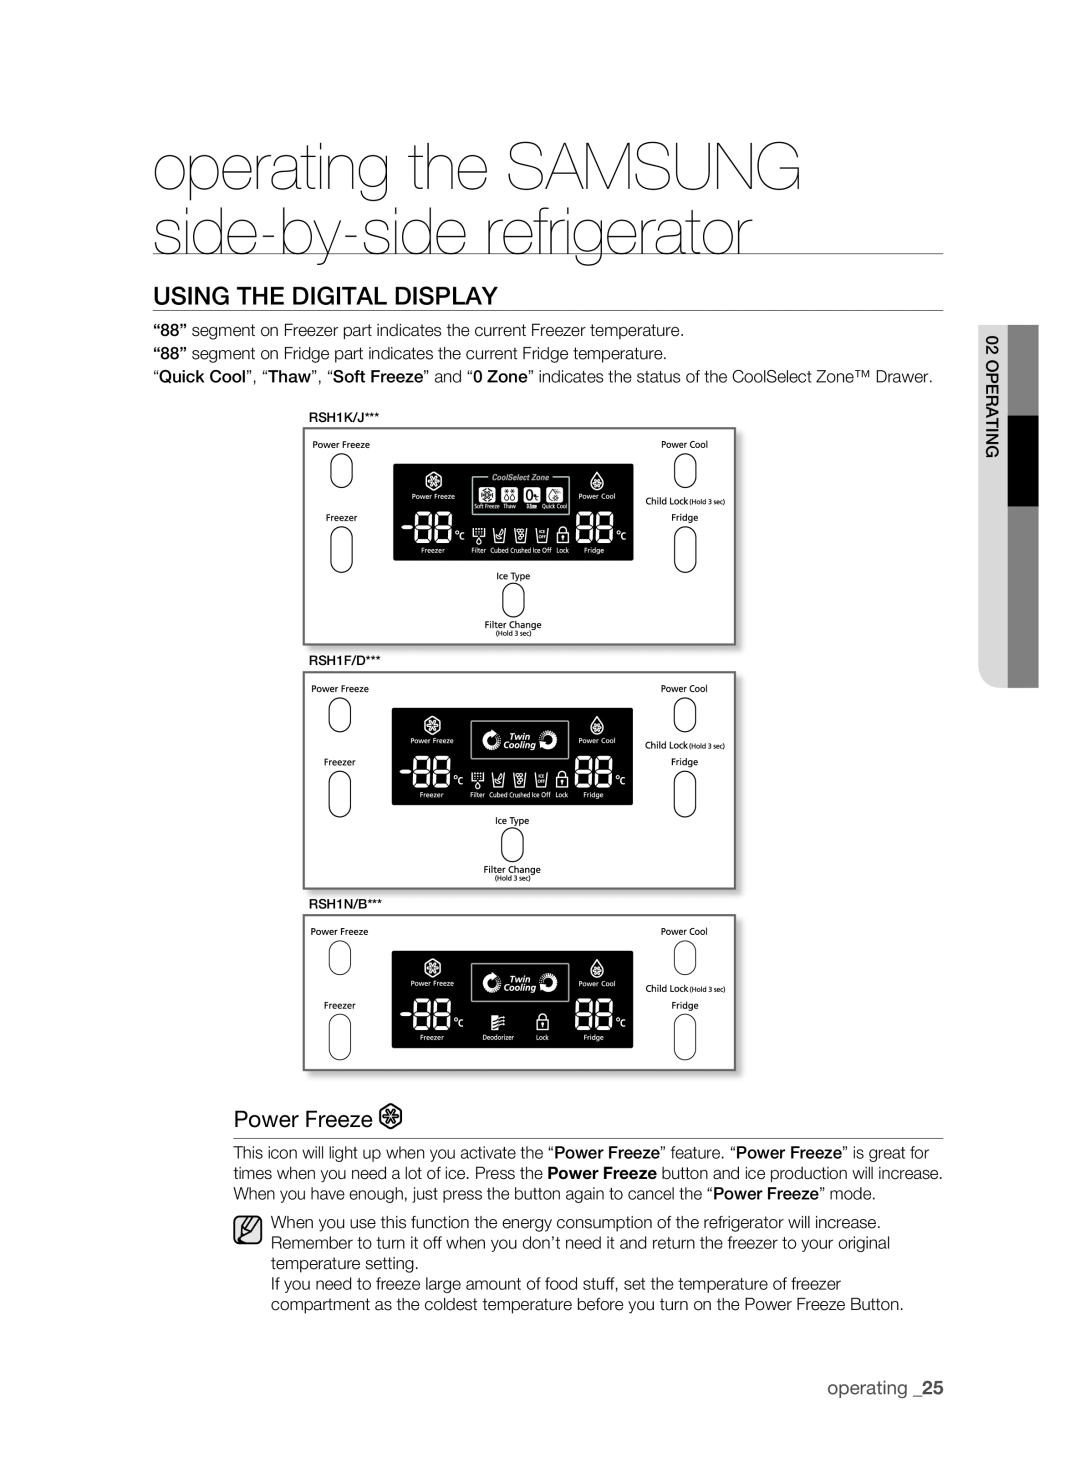 Samsung RSH1B, SRS610HDSS, RSH1K Using the digital display, Power Freeze, operating the SAMSUNG side-by-side refrigerator 